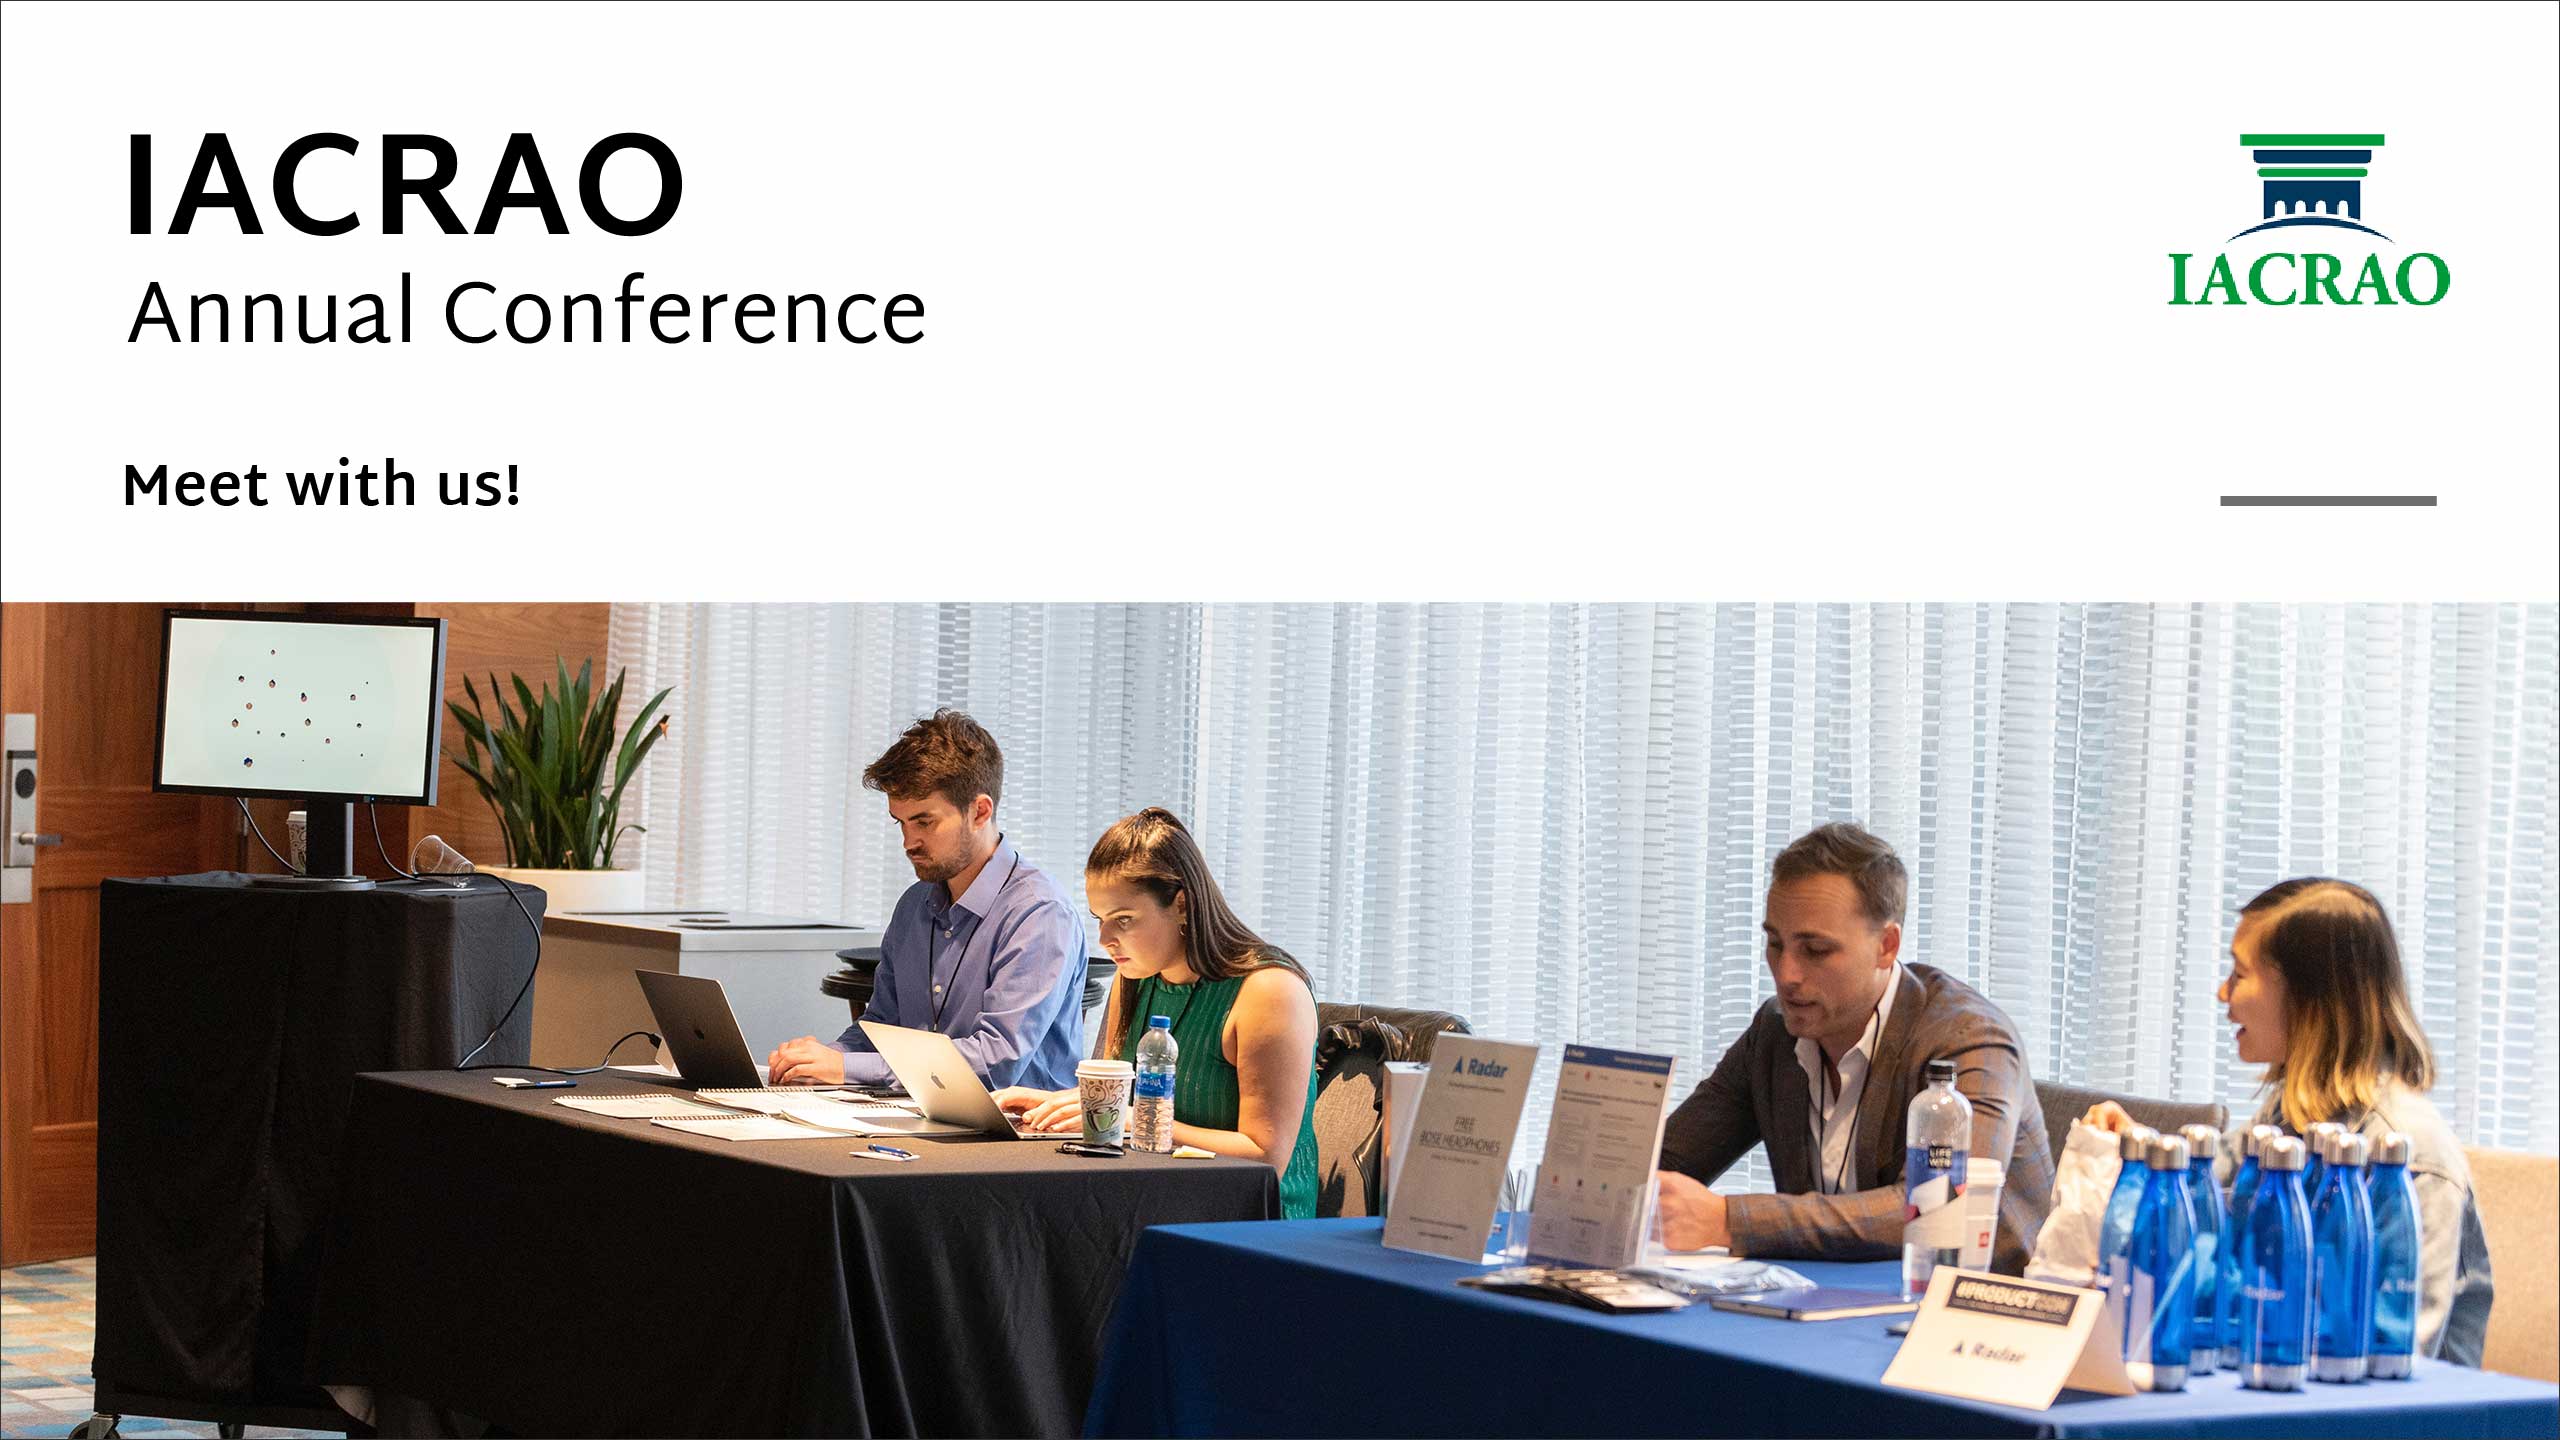 IACRAO Annual Conference